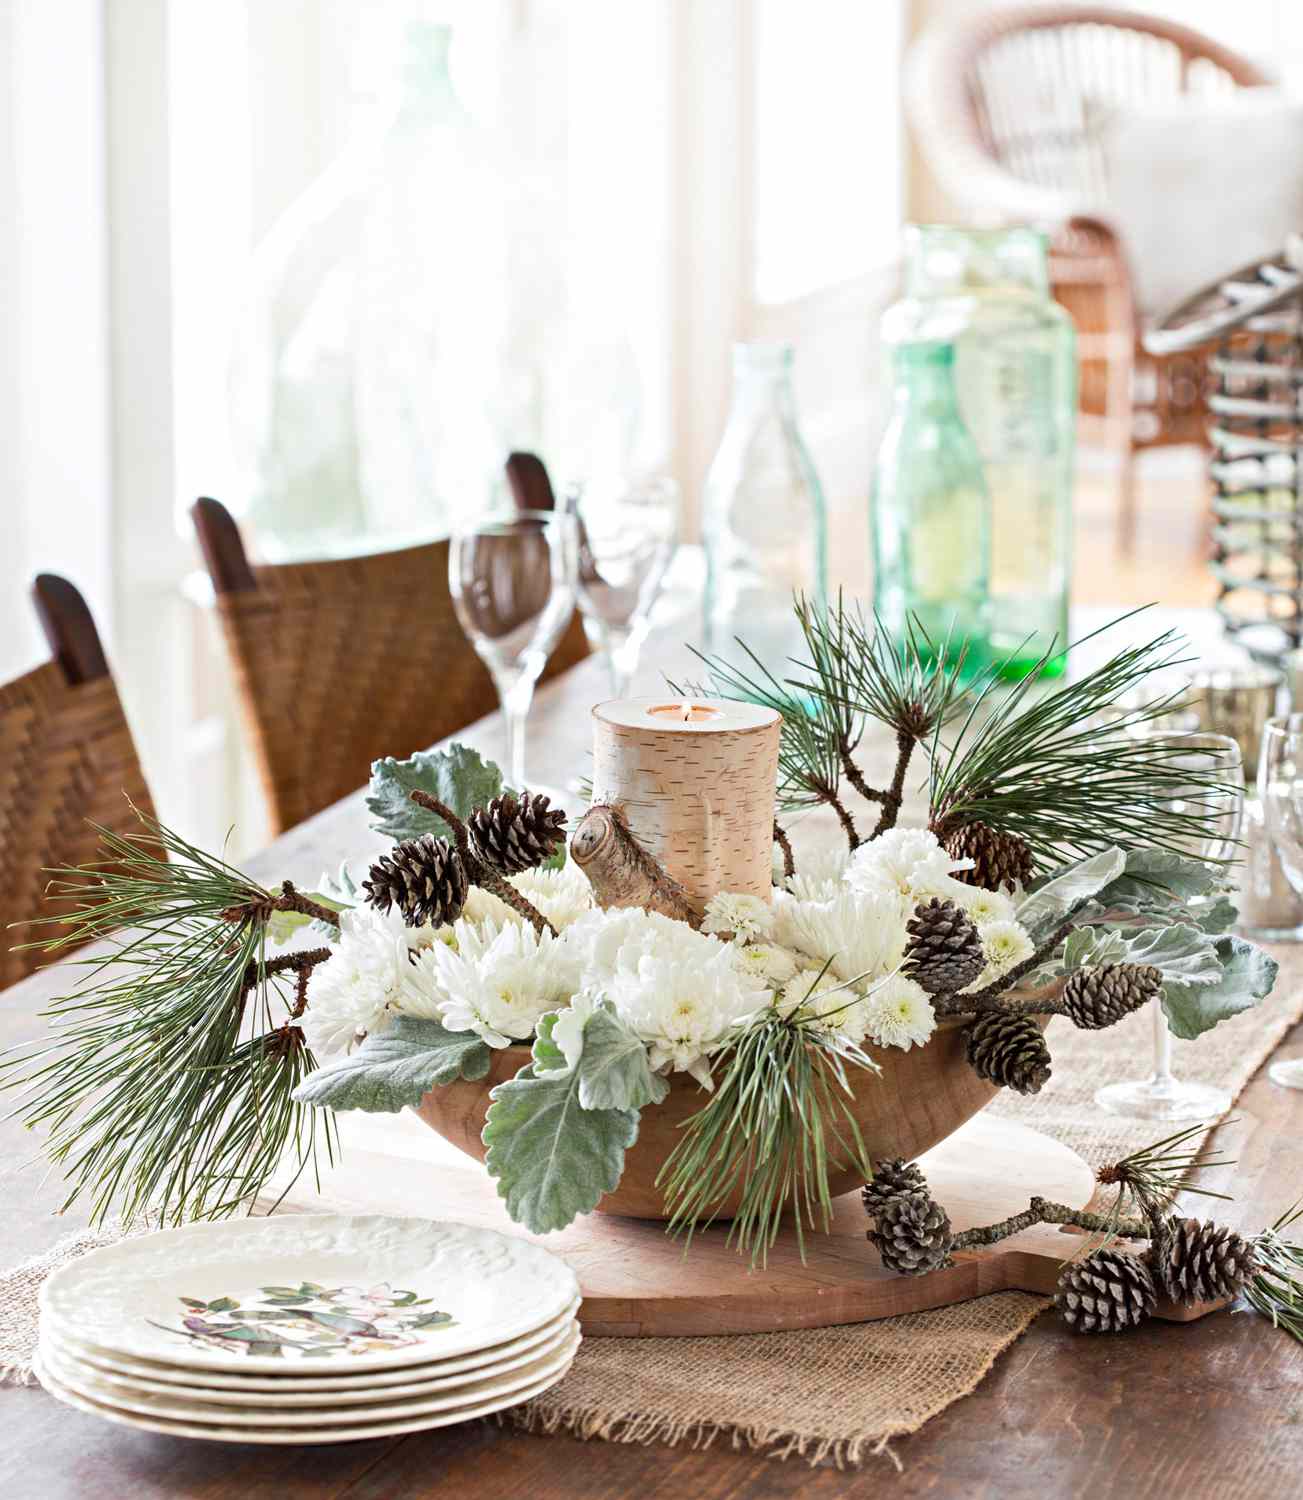 50 Easy Christmas Centerpiece Ideas  Midwest Living